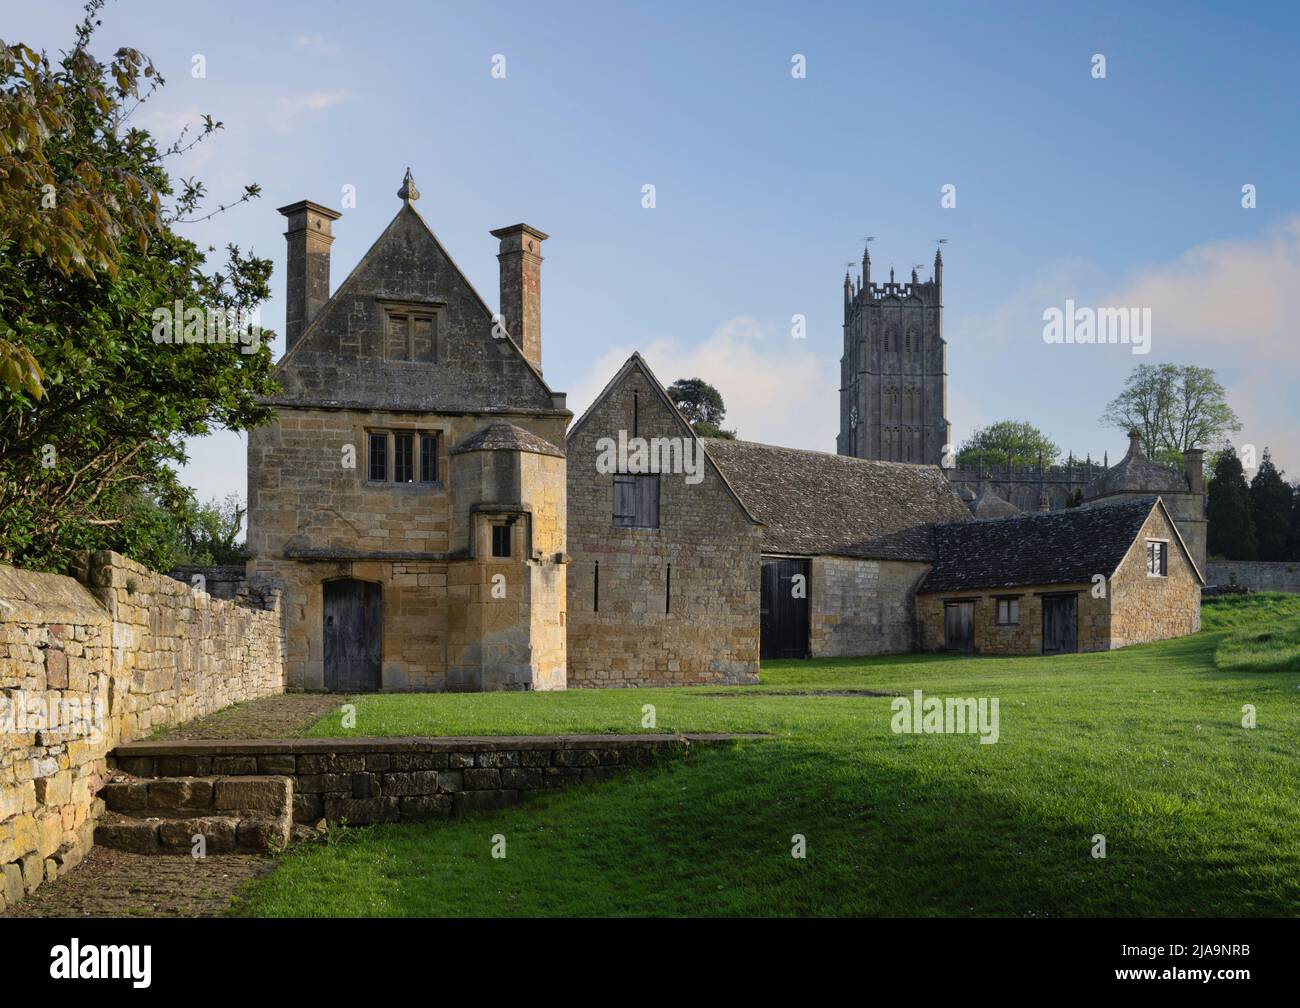 Kirche und Banketthaus in Chipping Campden, Cotswolds, England. Stockfoto